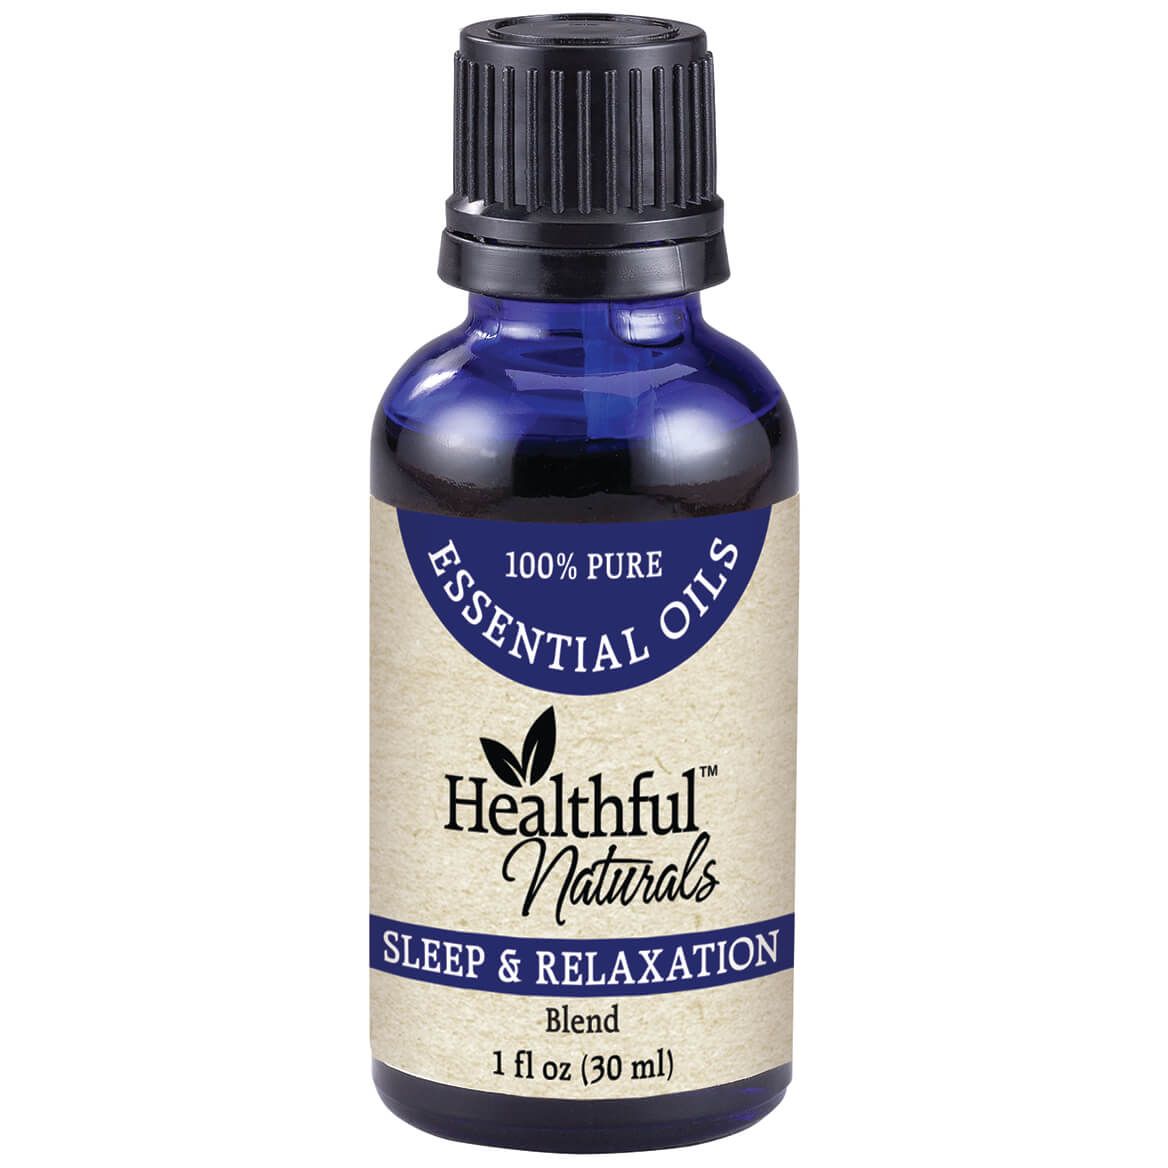 Healthful™ Naturals Sleep and Relaxation Essential Oil Blend + '-' + 373783